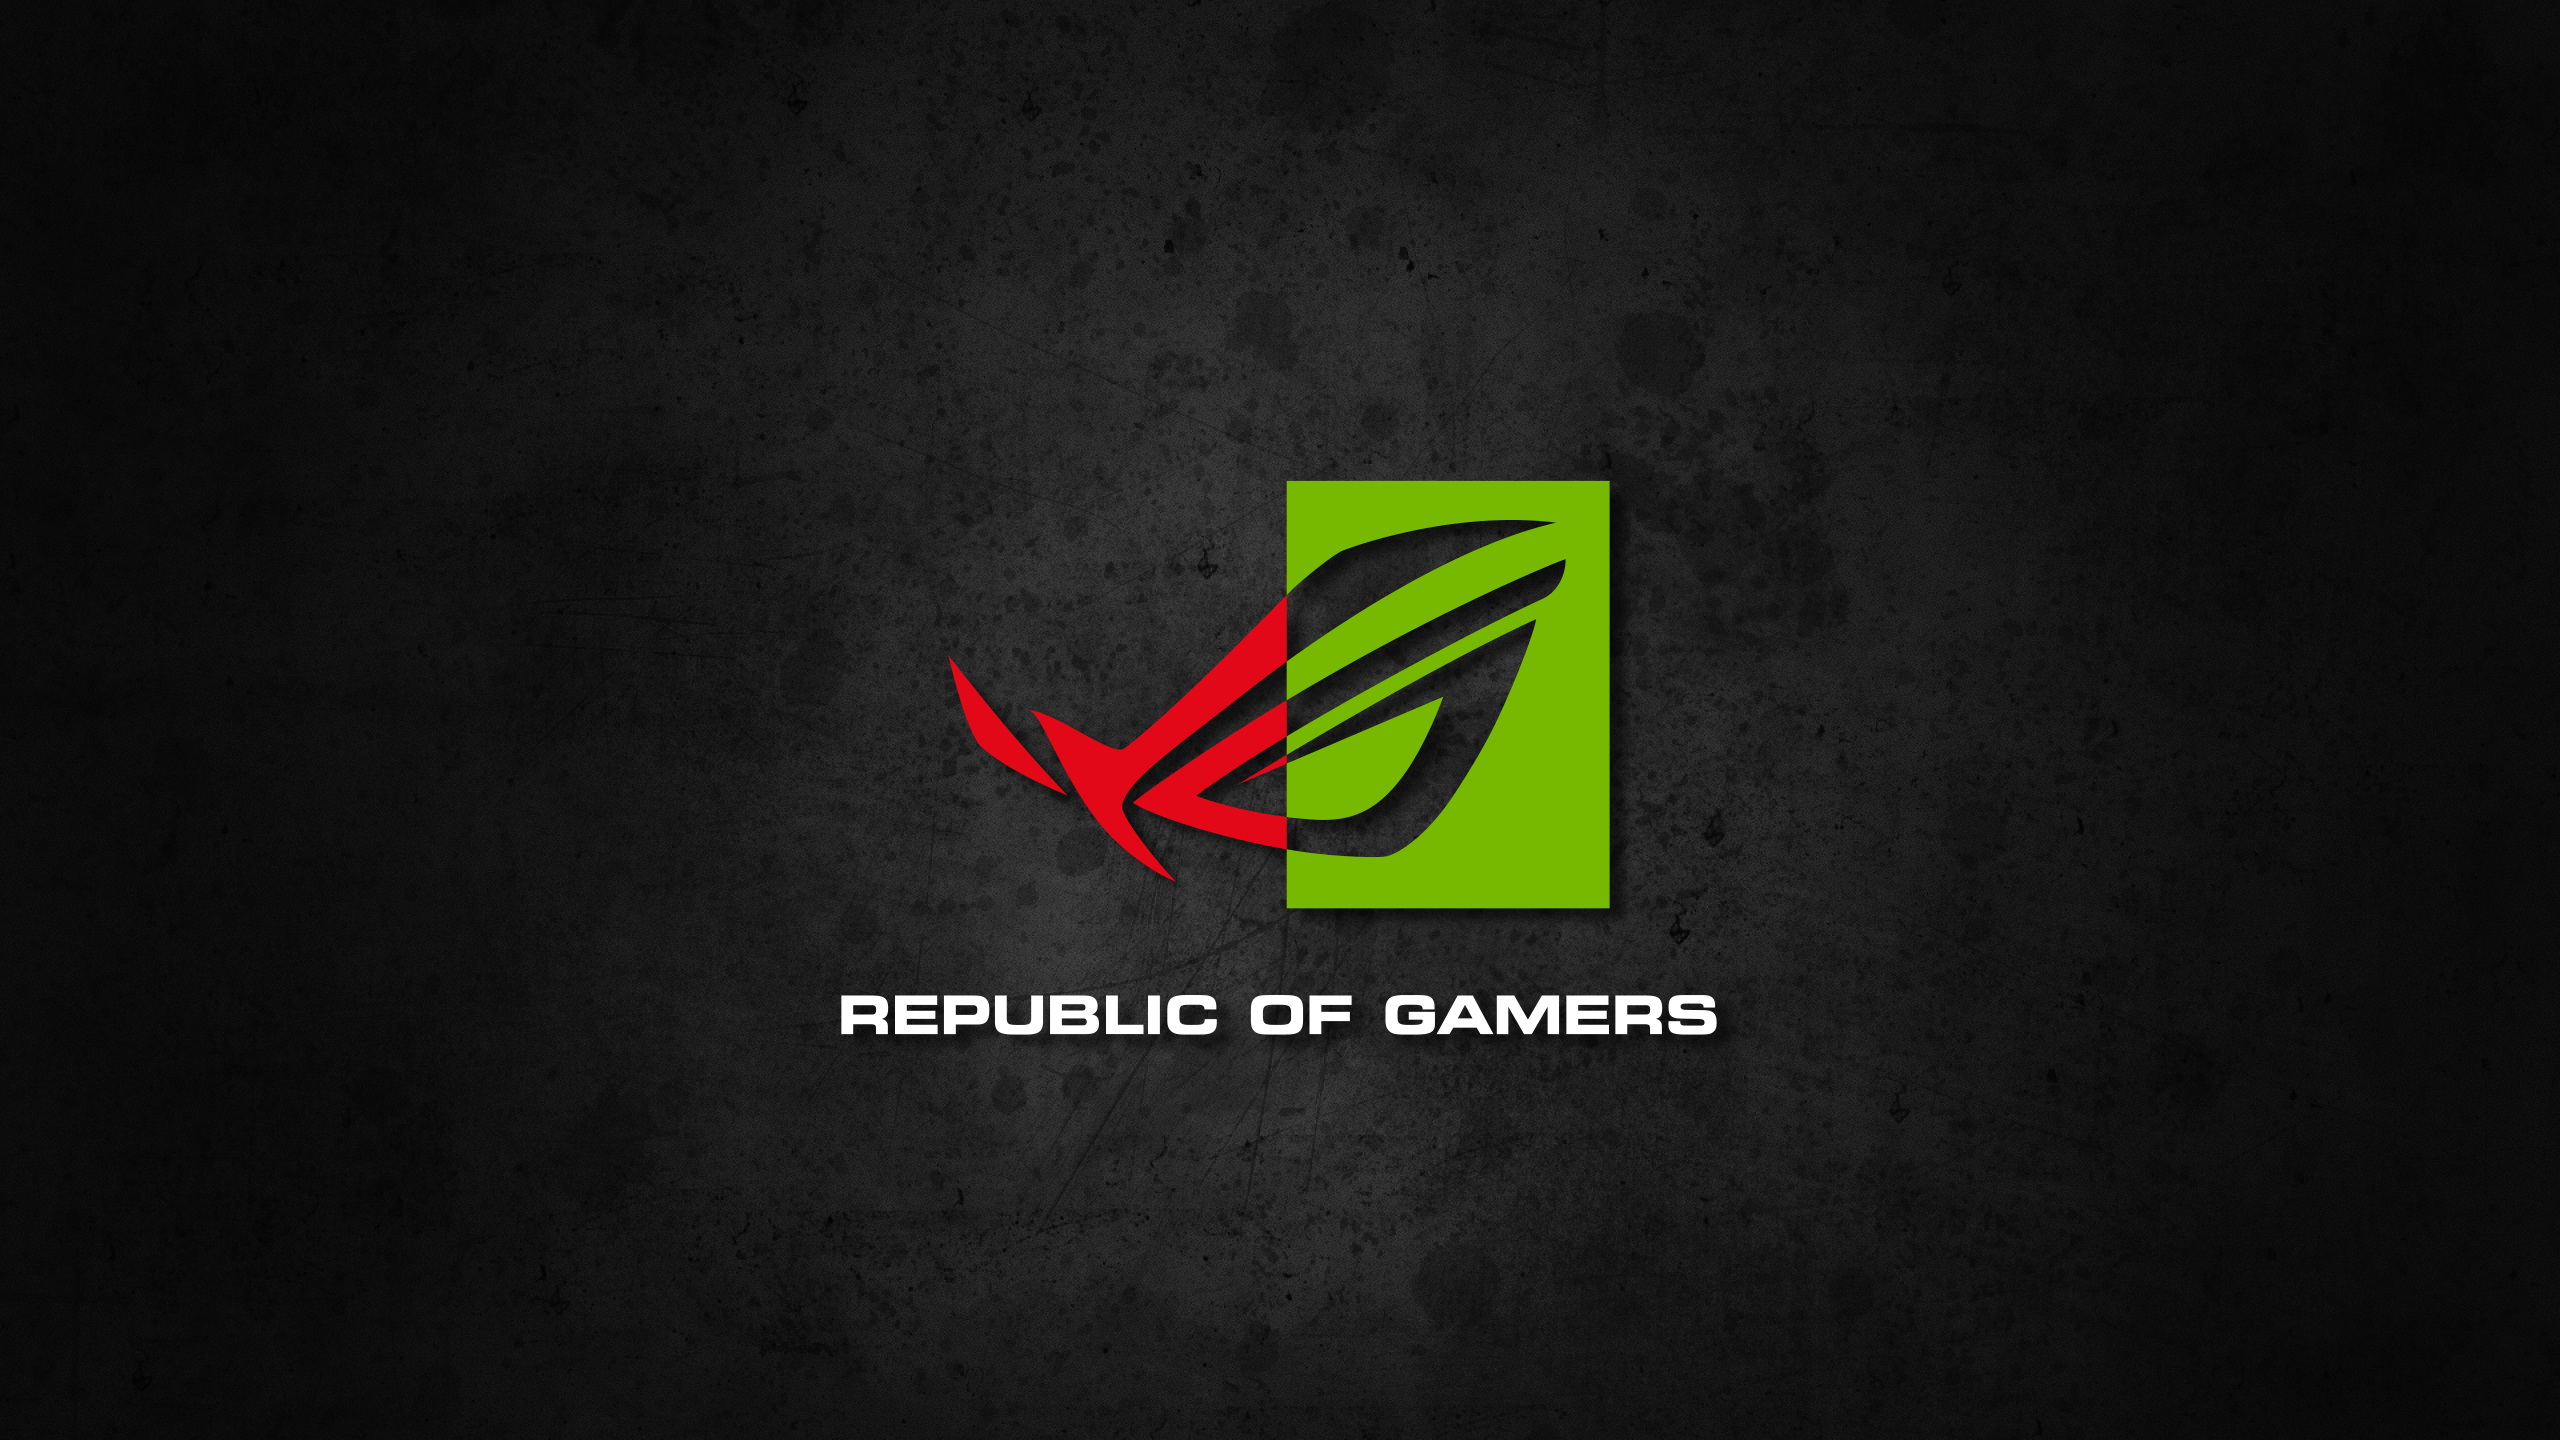 Best 43+ NVIDIA Asus ROG Wallpapers on HipWallpapers